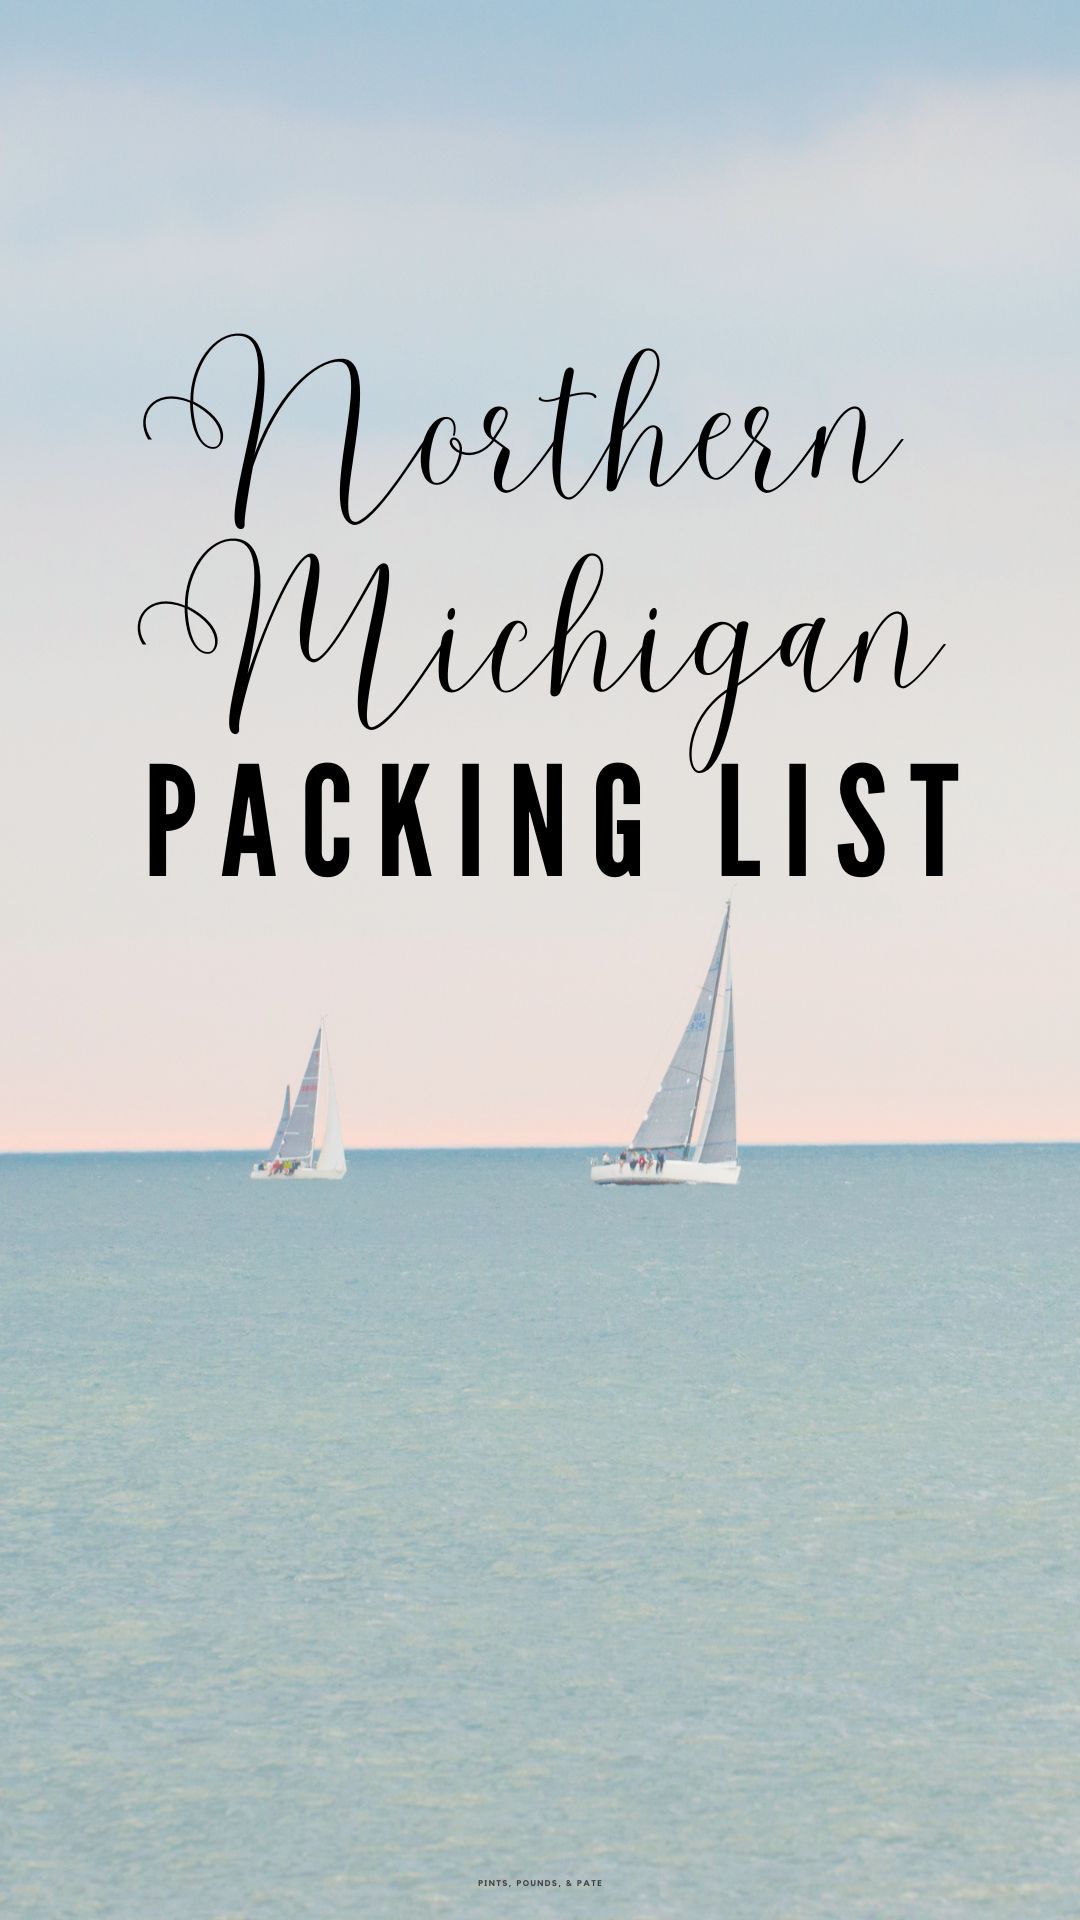 Up North Packing List: Northern Michigan Packing Guide